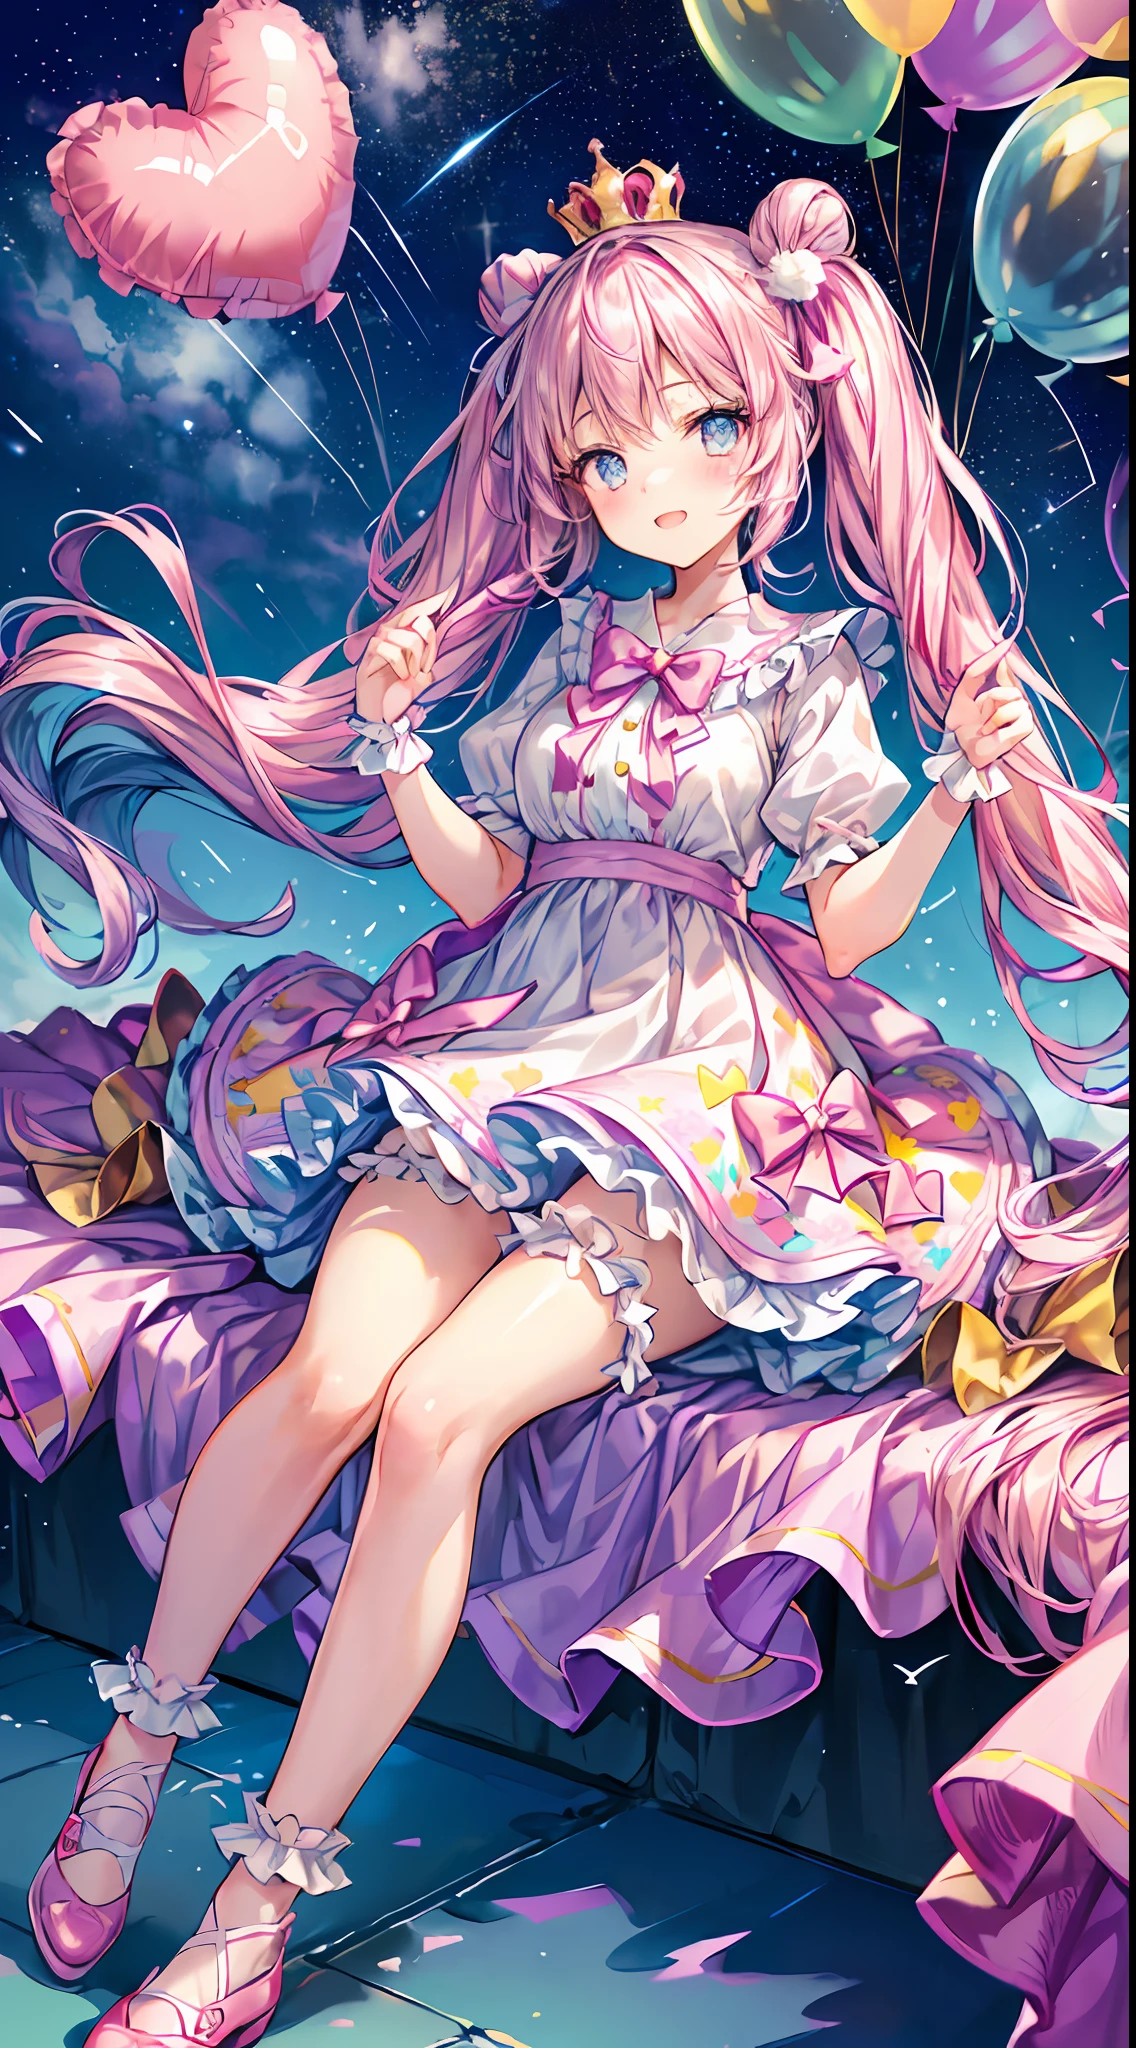 (fullbody, legs and shoes visible: 1.2)) expressive eyes, 1girl, pale skin, long hair, windblown hair, ((absurdly long hair)), long sidelocks, hime bangs, hair fringe, hair bun, ((very long twintails)), iridescent hair, light pink hair, blushing, full face blushing, big sparkling pastel purple eyes, (gradient eyes), open mouth smile, cute pose, ((holding balloons : 1.3)) 
((cute and pastel fashion)) ((🦄🎠🎈🎉 theme : 1.4)) flowy pastel dress, ((dreamy multicolored open dress)), (floating ribbons), lavender ruffles, pink frills, (light blue lace), detached short sleeves, puffy skirt, ((rainbows and stars print skirt : 1.3)), lolita skirt, purple bows, ((pompon ribbons hair ornament : 1.4)), multiple bows, striped lace stockings, (heart shaped leg garter), cute (pastel purple) shoes ((hyperdetailed clothing and fashion)) looking at you, vintage girl, blushing, (beautiful detailed eyes), (extremely detailed CG unity 8k wallpaper) (best shadow), ((an extremely delicate and beautiful)), (detailed light), ((depth of field)) big head, big sparkling eyes, moe, splash art, cinematic lighting, frontal view, volumetric lighting maximalist photo illustration k resolution high res intricately detailed complex key visual precise linear 
((in the dreamy pastel sky background, surrounded by sunset clouds, shooting stars, castles in the clouds)) ((hyperdetailed scenery, foggy clouds, suspended by balloons, hearts : 1.3))